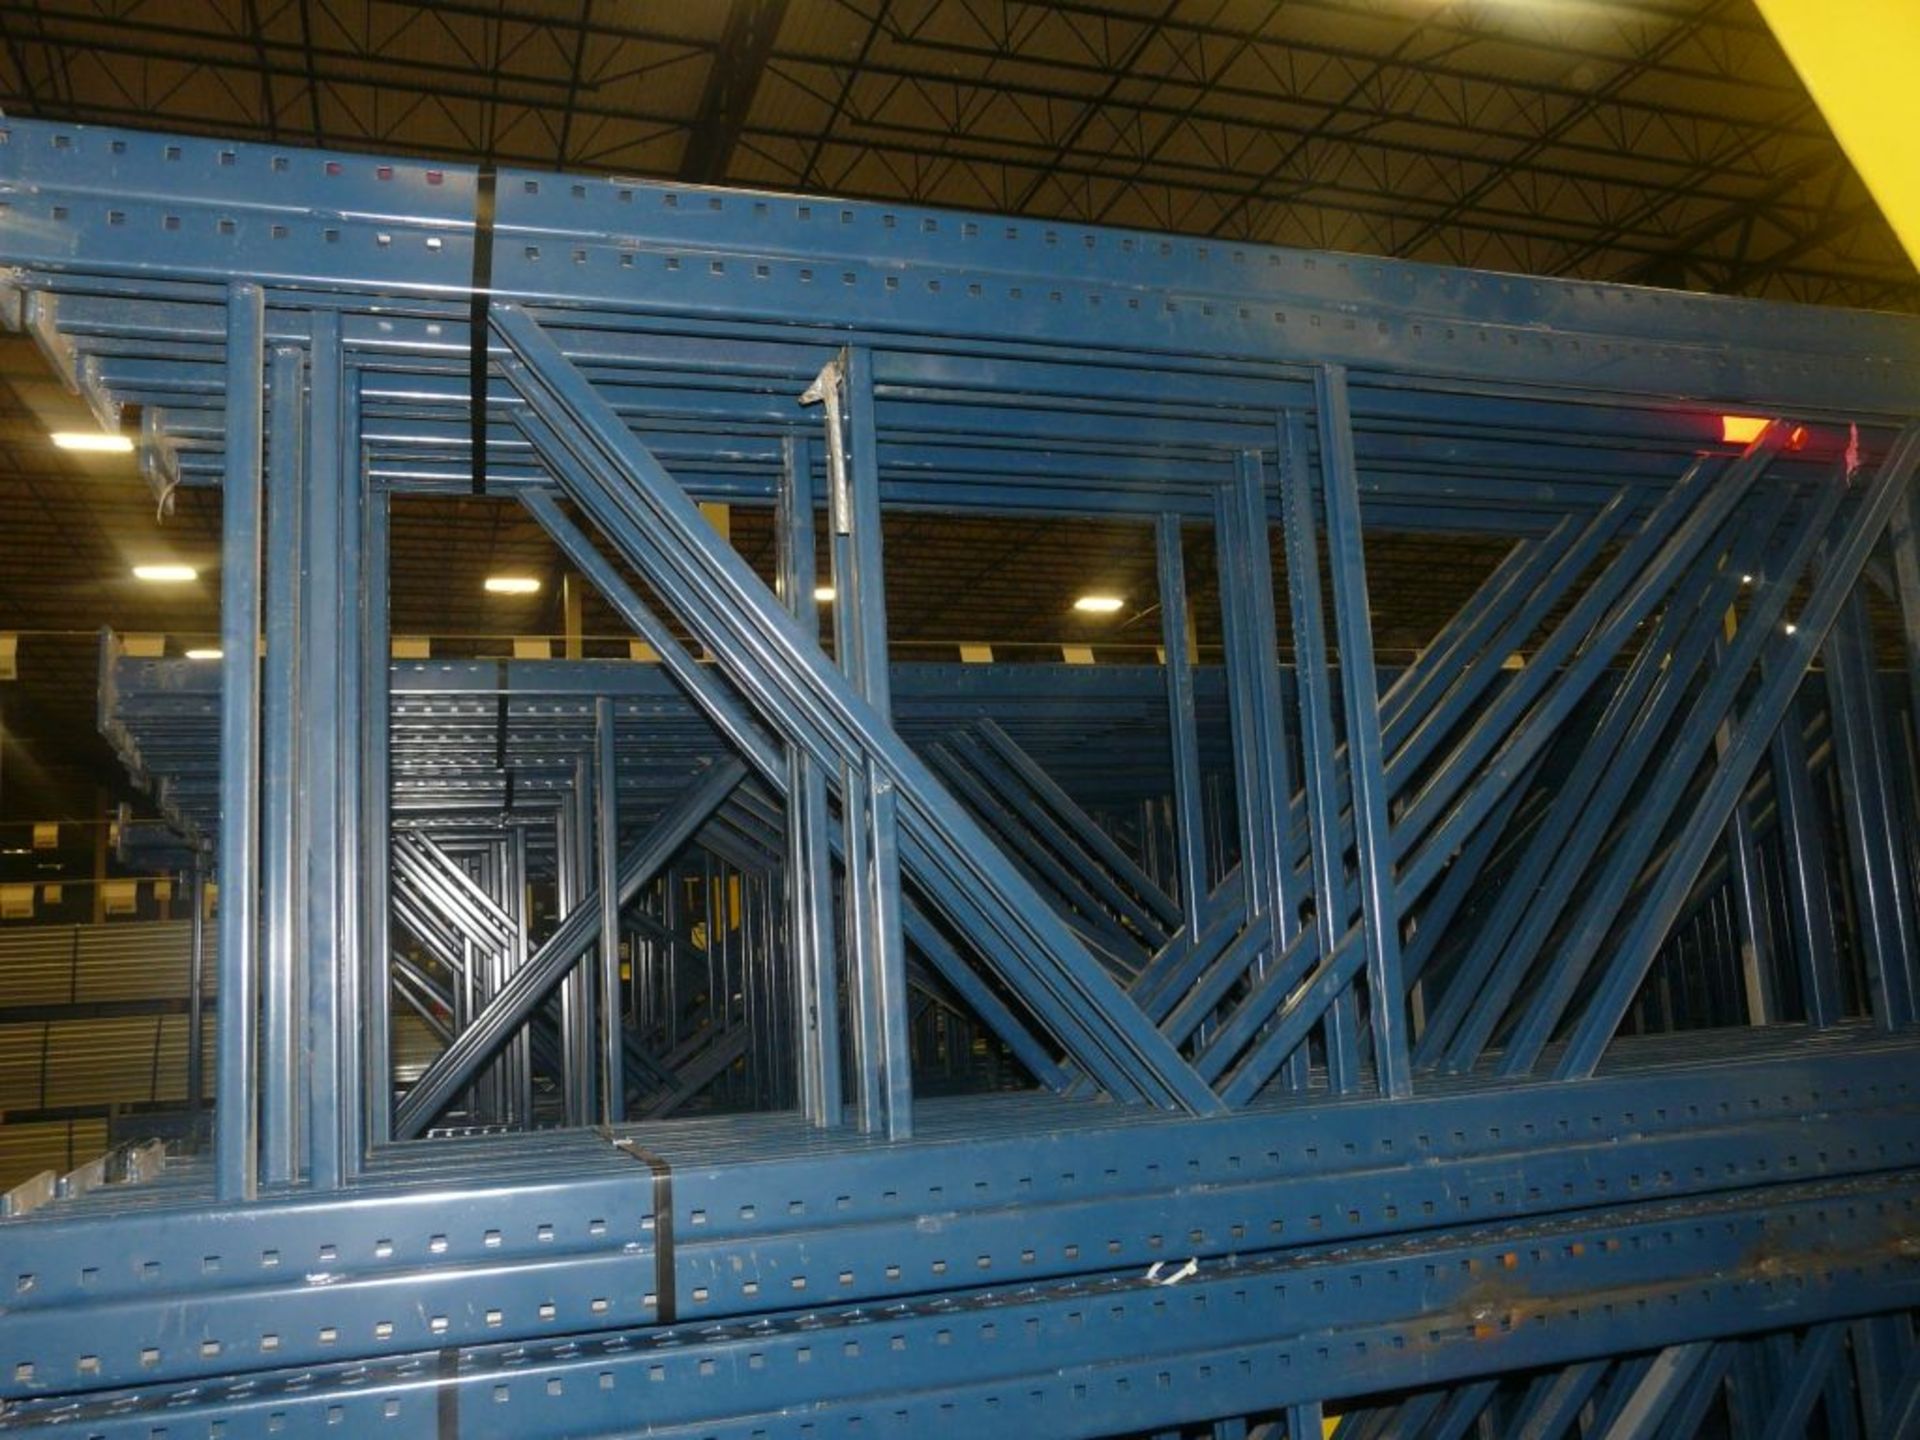 Lot of (10) Double Uprights - 33'H x 48"W; Tag: 223979 - $30 Lot Loading Fee - Image 3 of 3